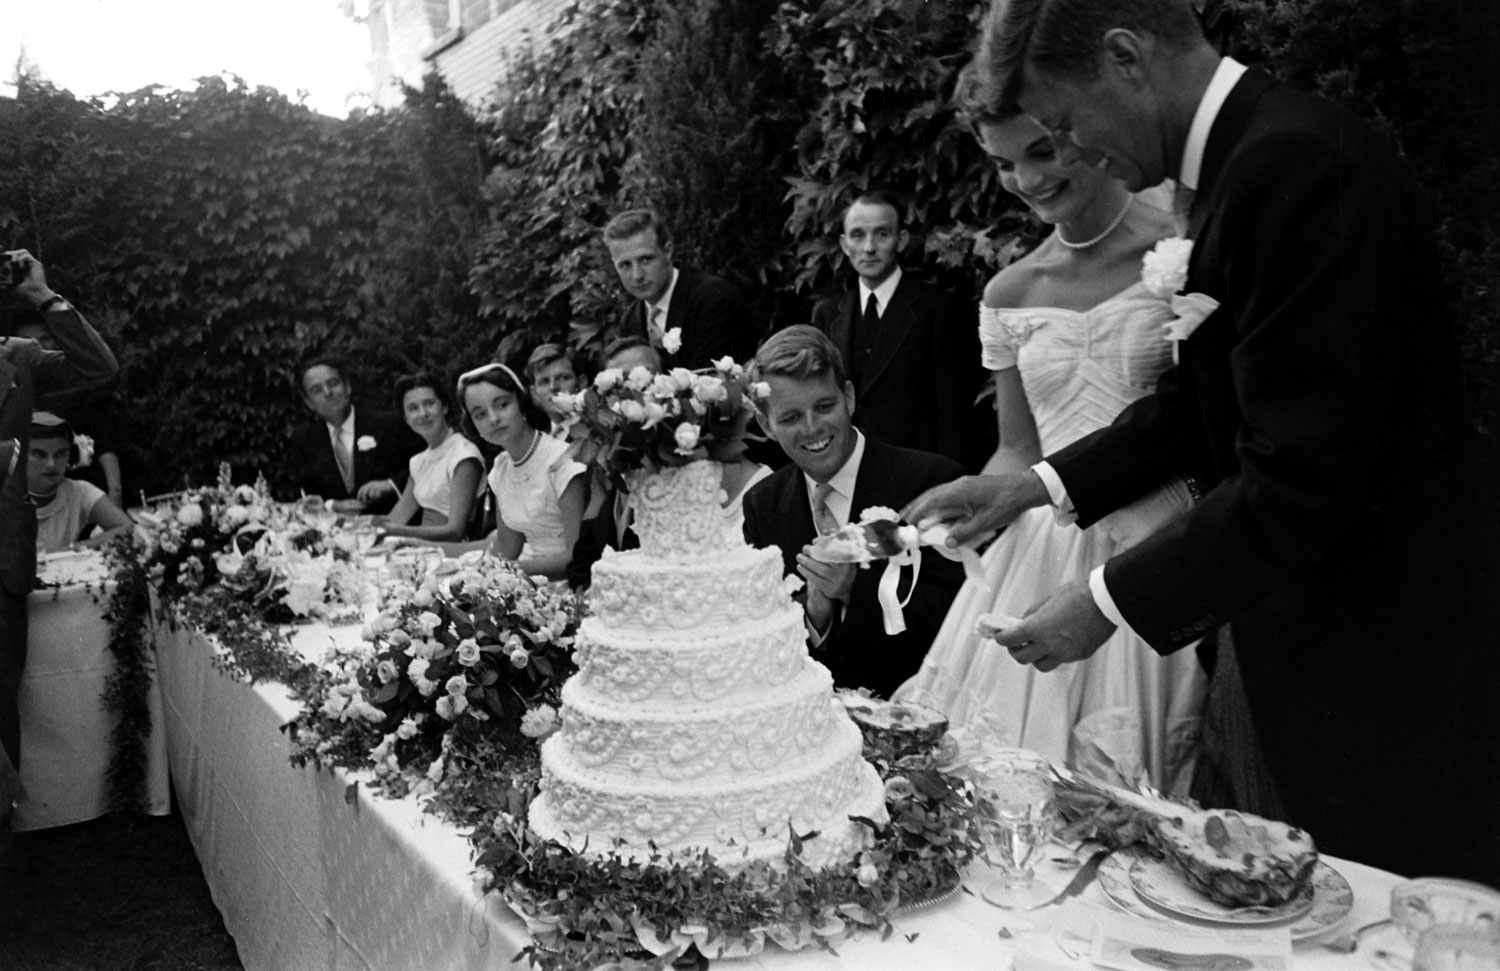 Guests, including Robert Kennedy, watch as newly married John and Jackie Kennedy cut their wedding cake, Newport, R.I., Sept. 12, 1953.